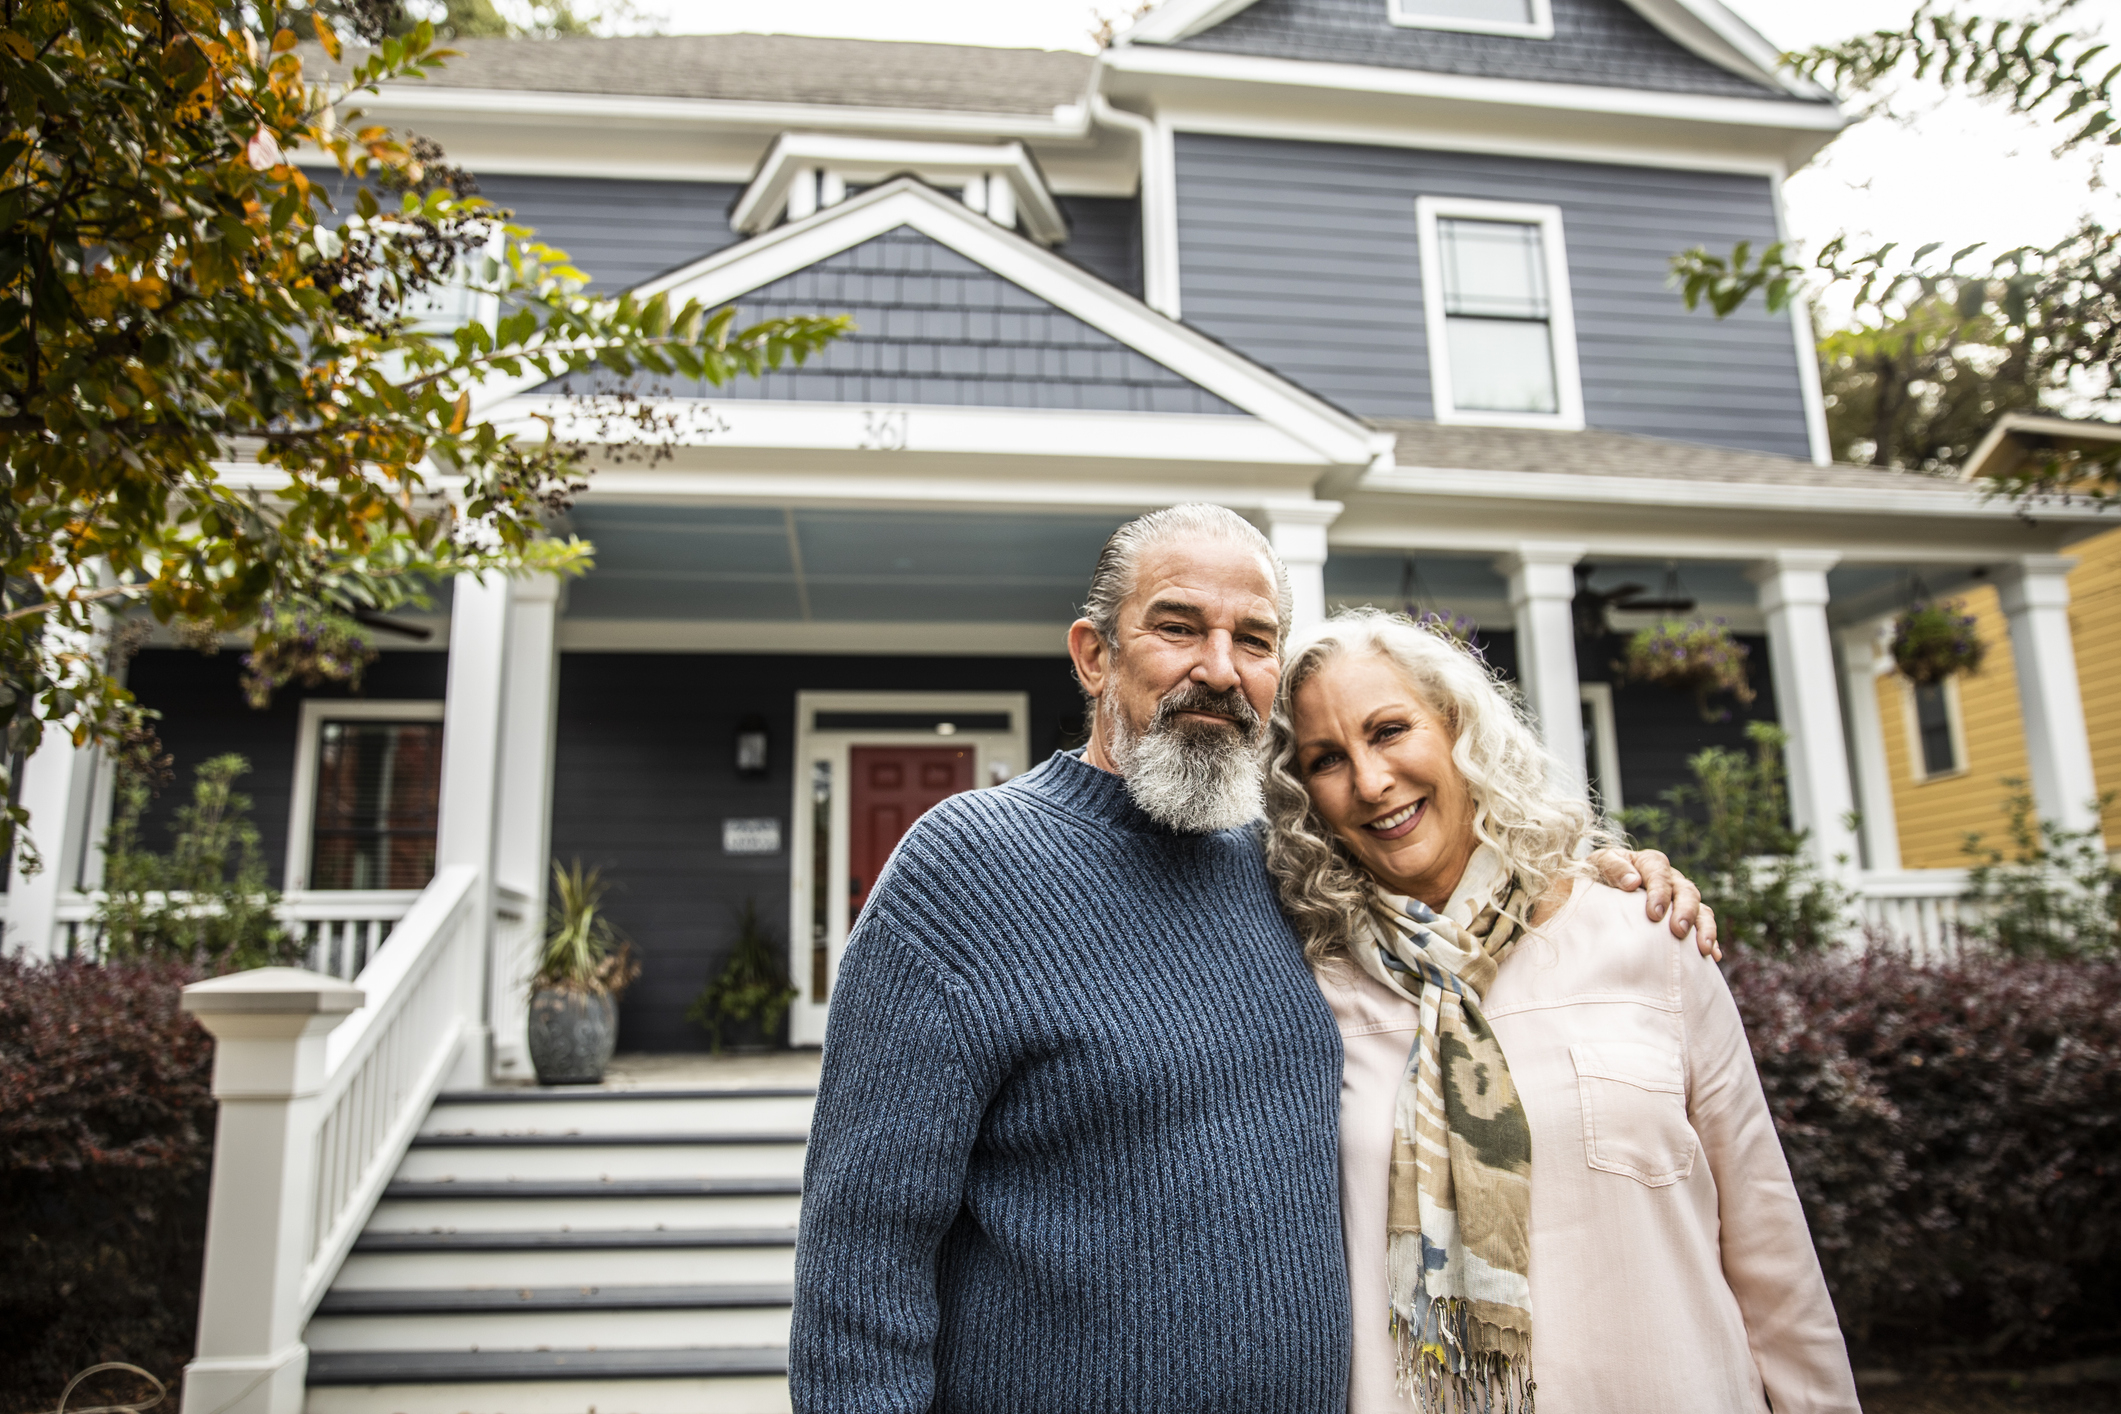 Older couple embracing and smiling in front of a house